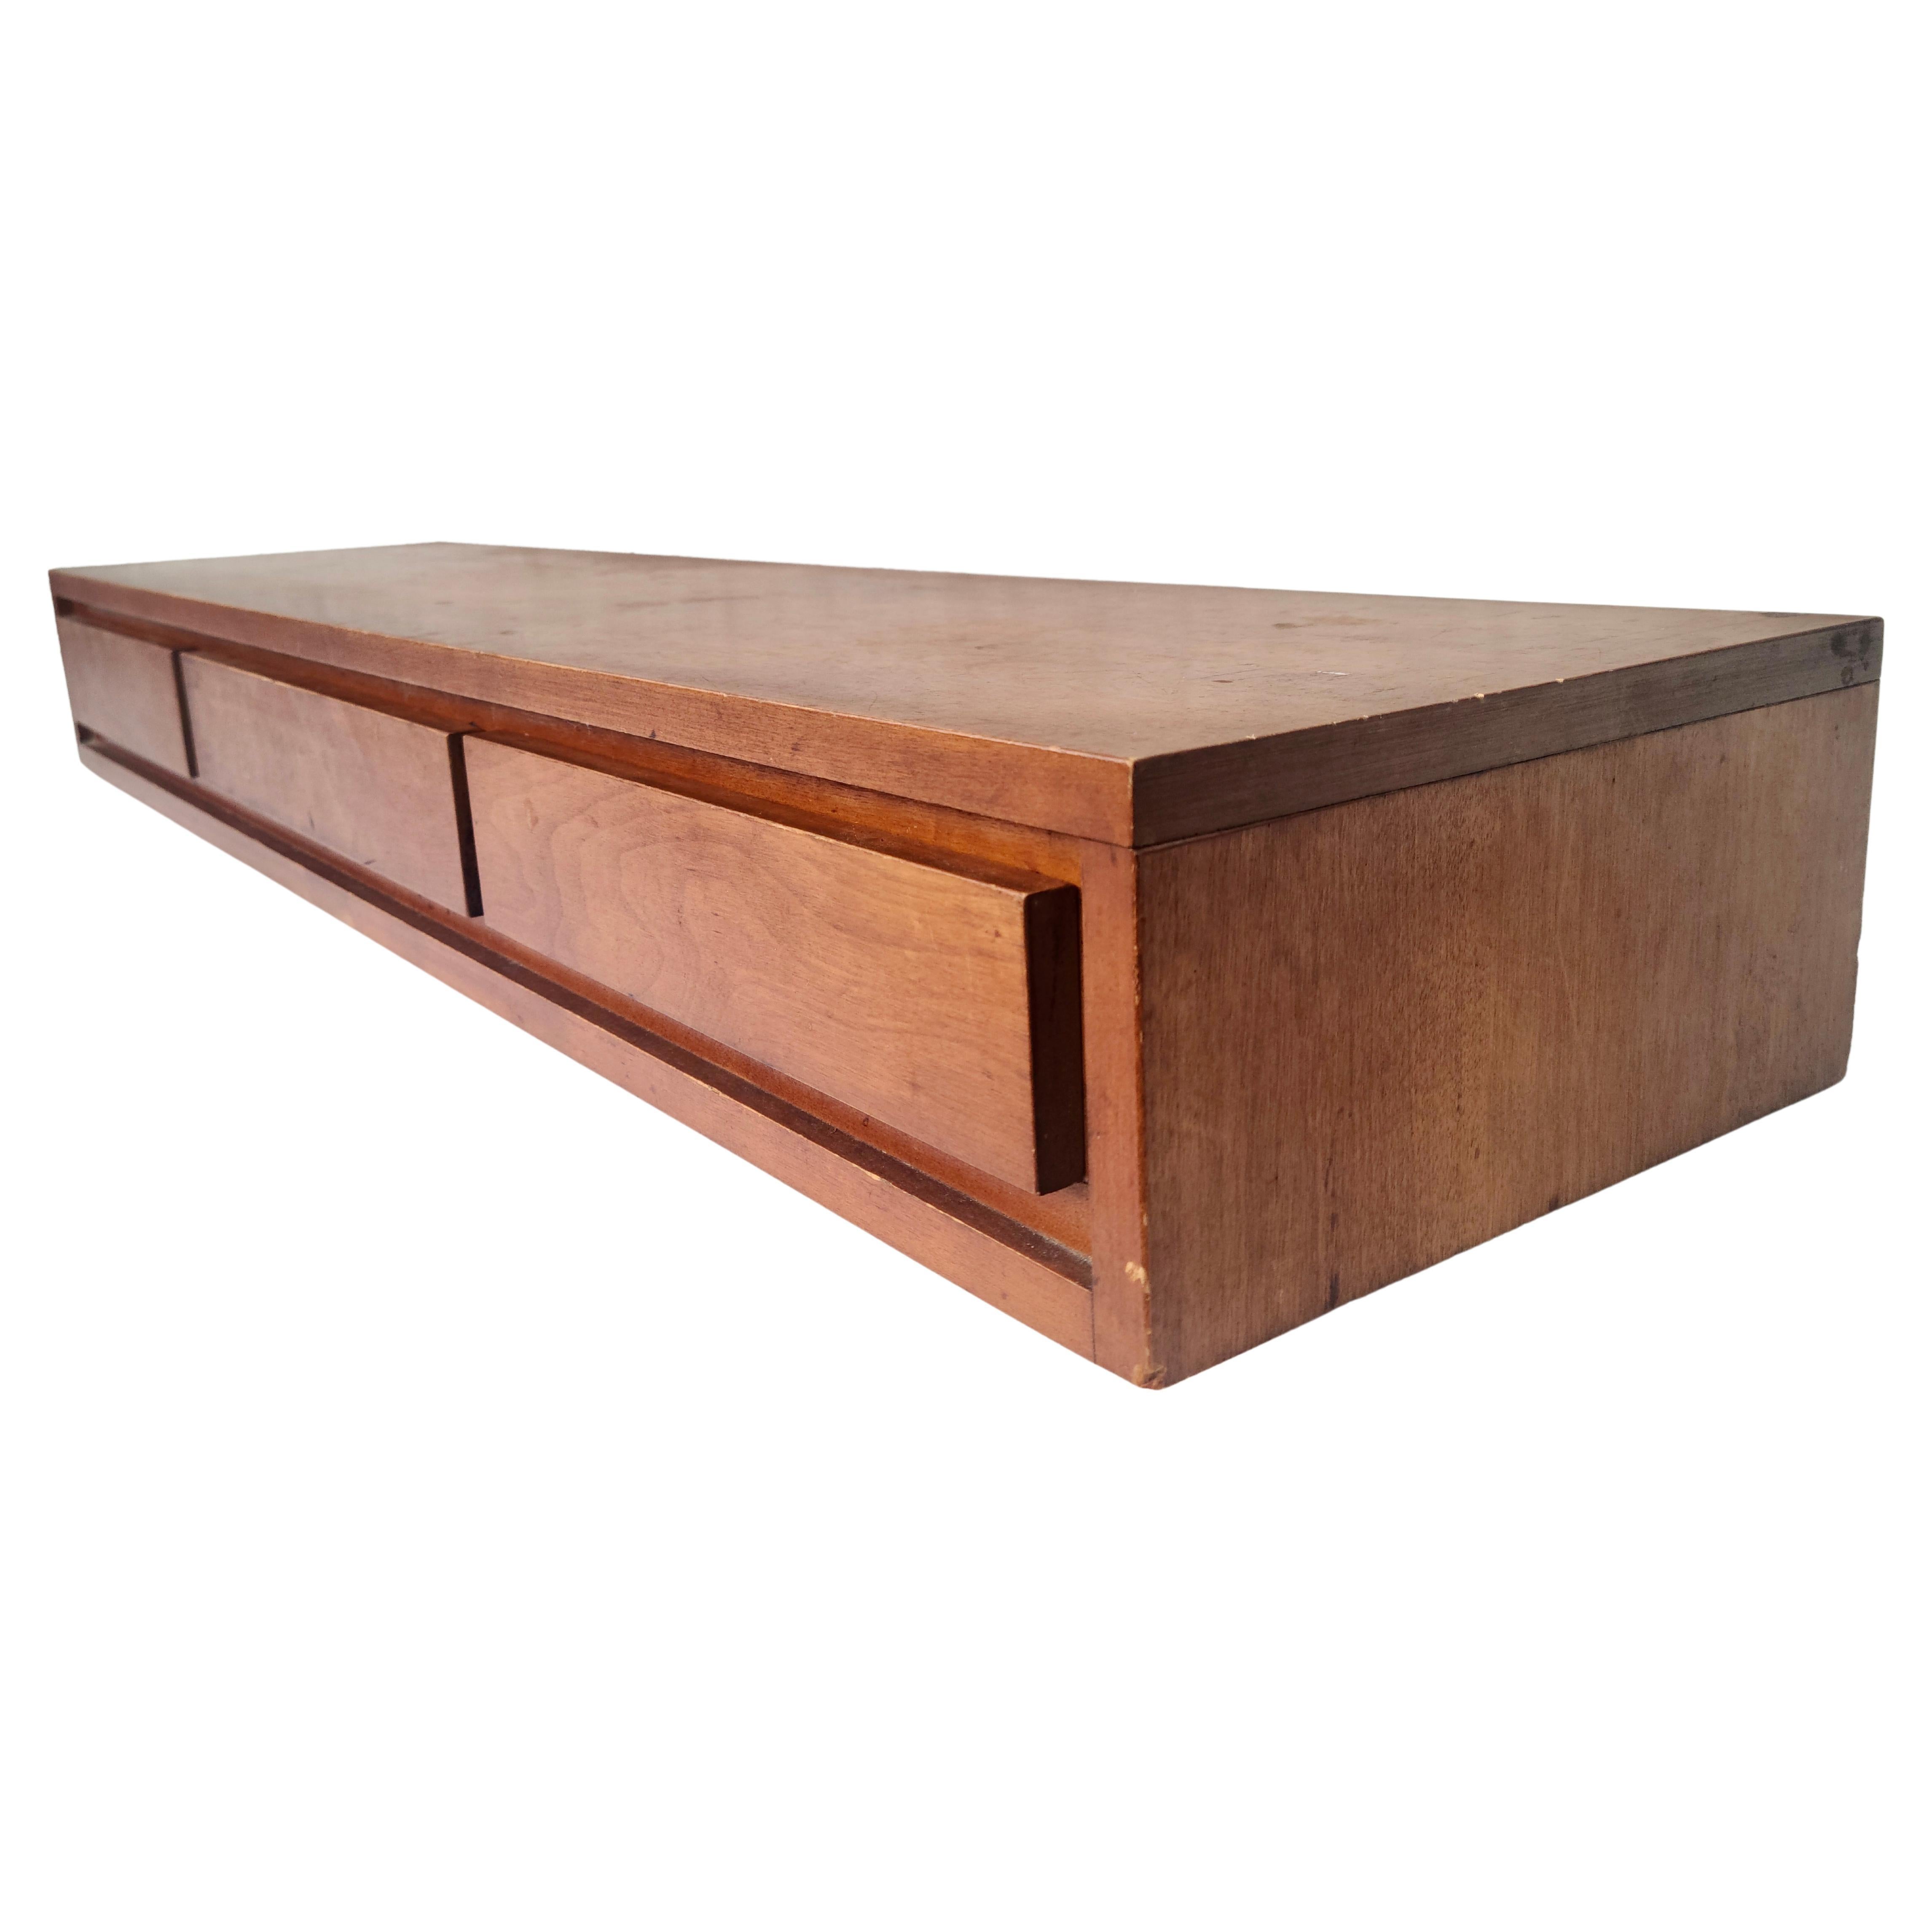 Conant Ball Gallery Drawer Box Modern Mates Leslie Diamond Rare In Good Condition For Sale In Fraser, MI